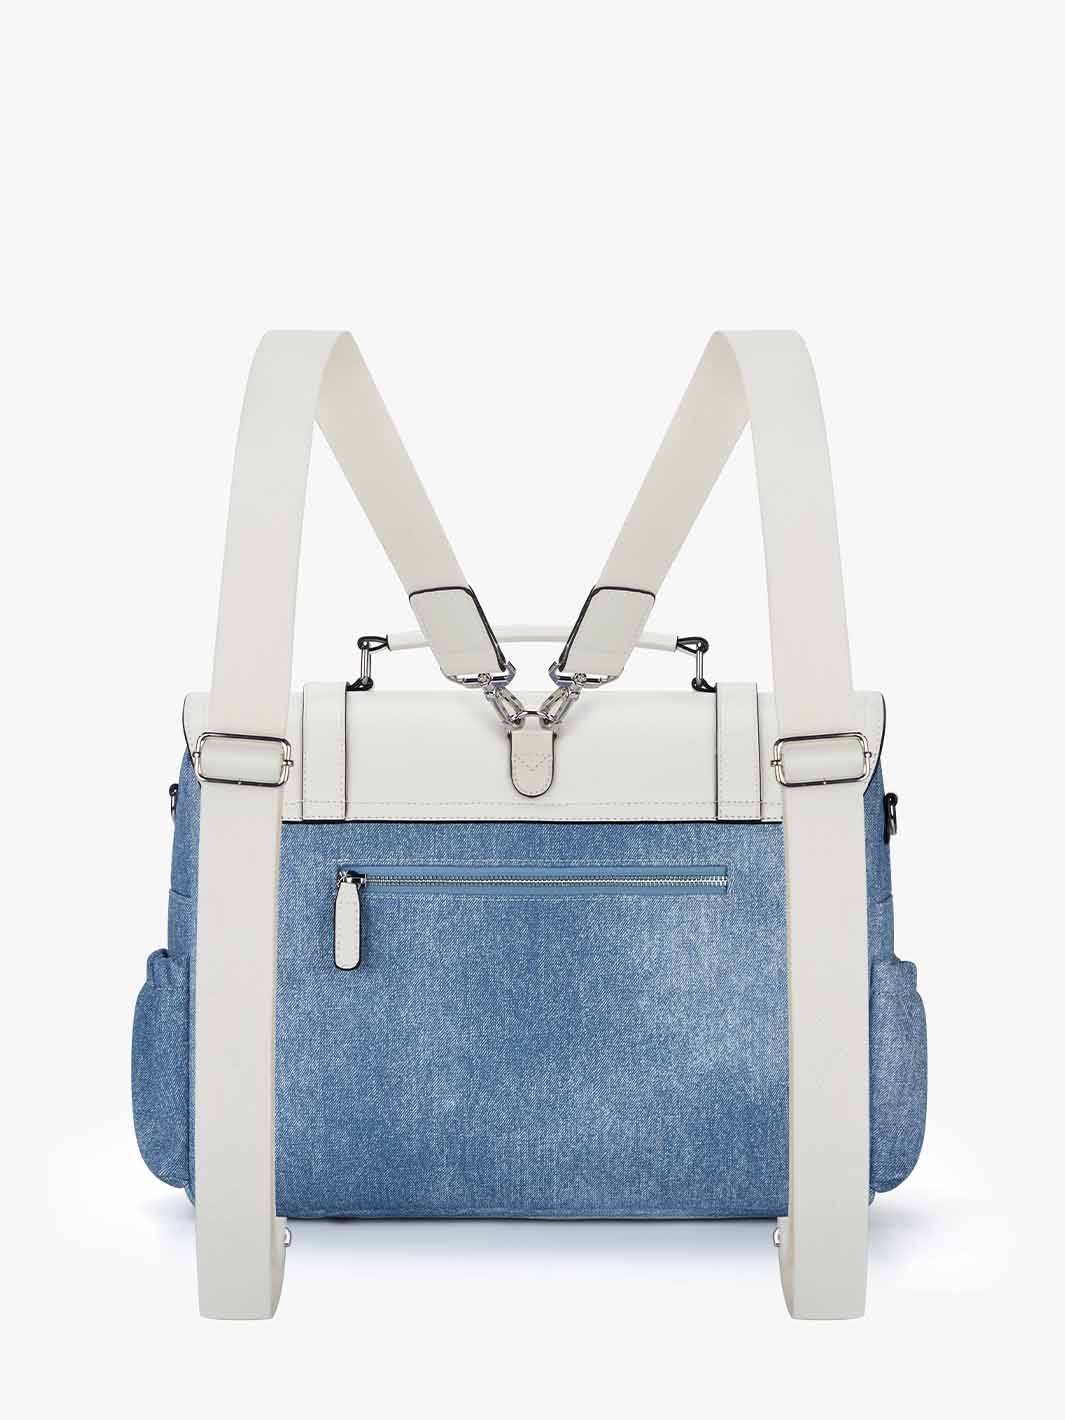 Leather Briefcase Backack for Women  with Denim-Inspired